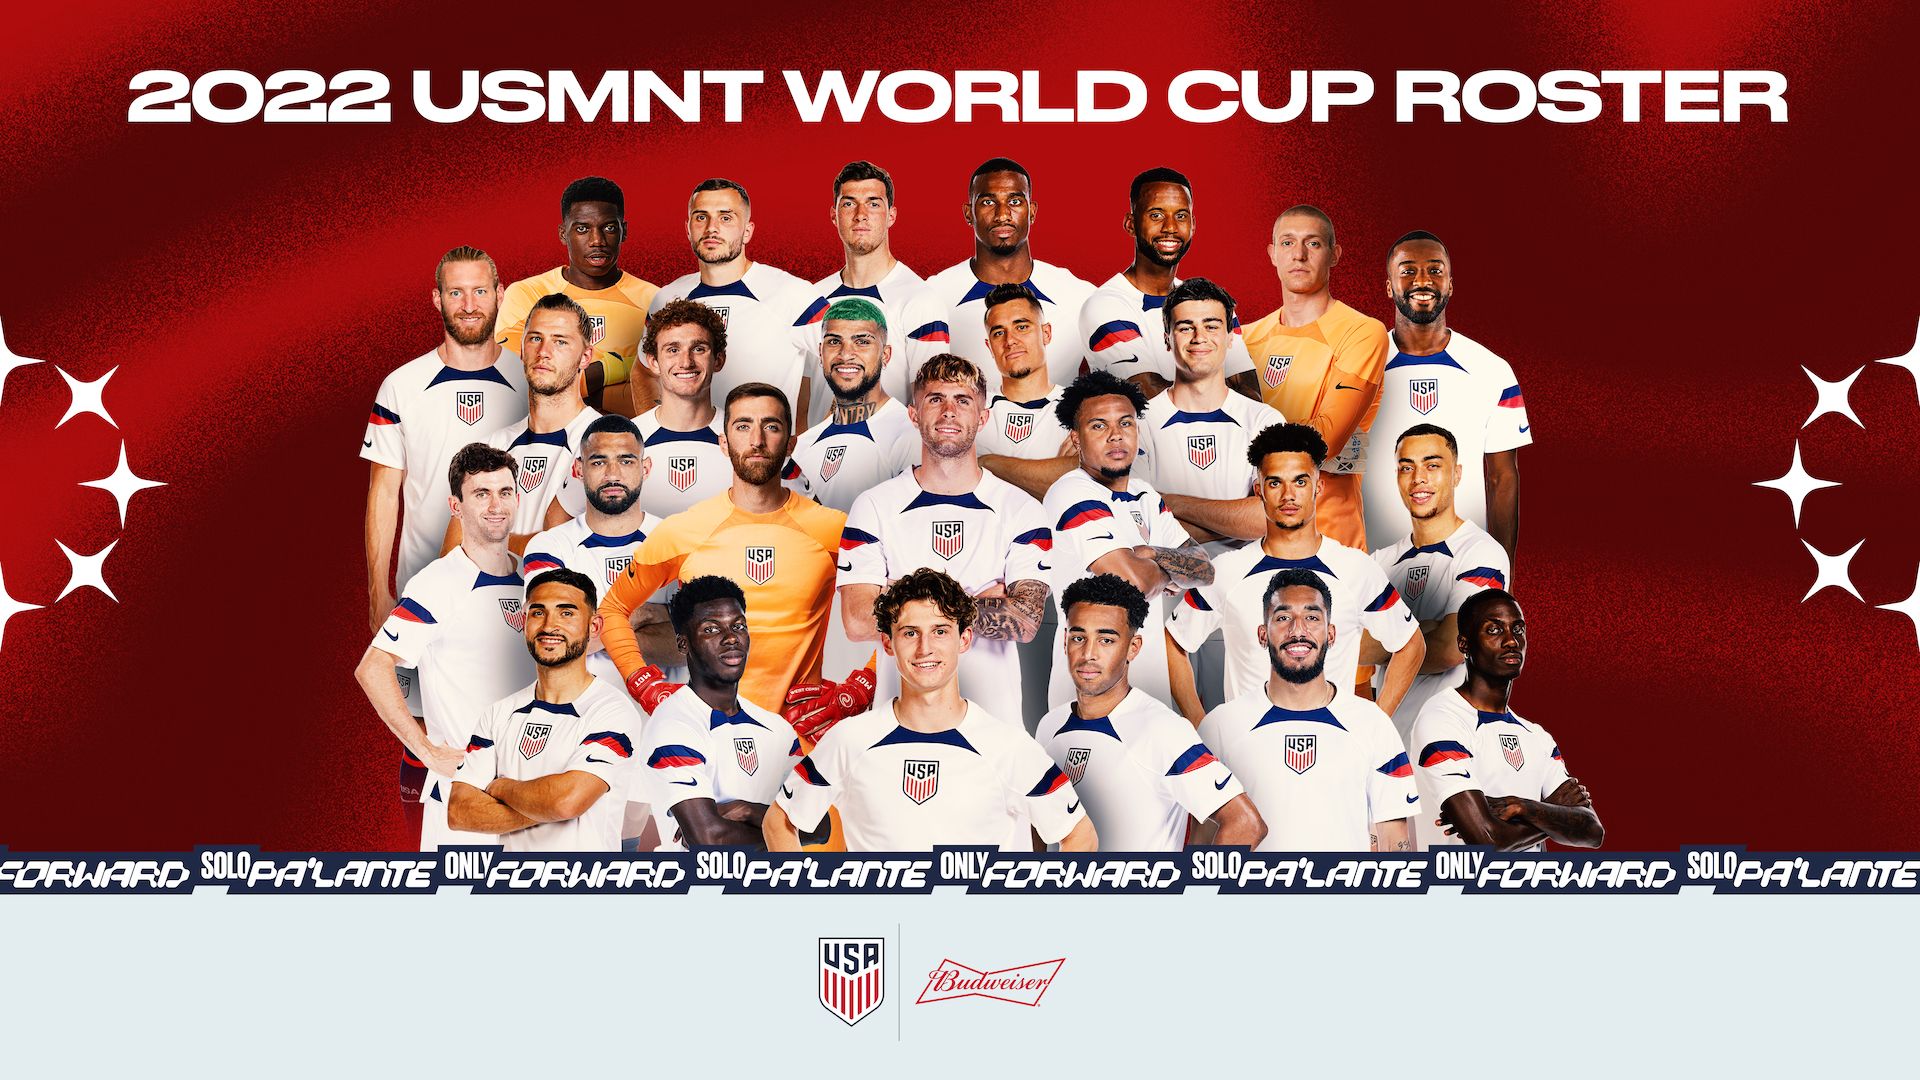 Texas Outlaw Writers Newsletter: Drink from the World Cup Edition